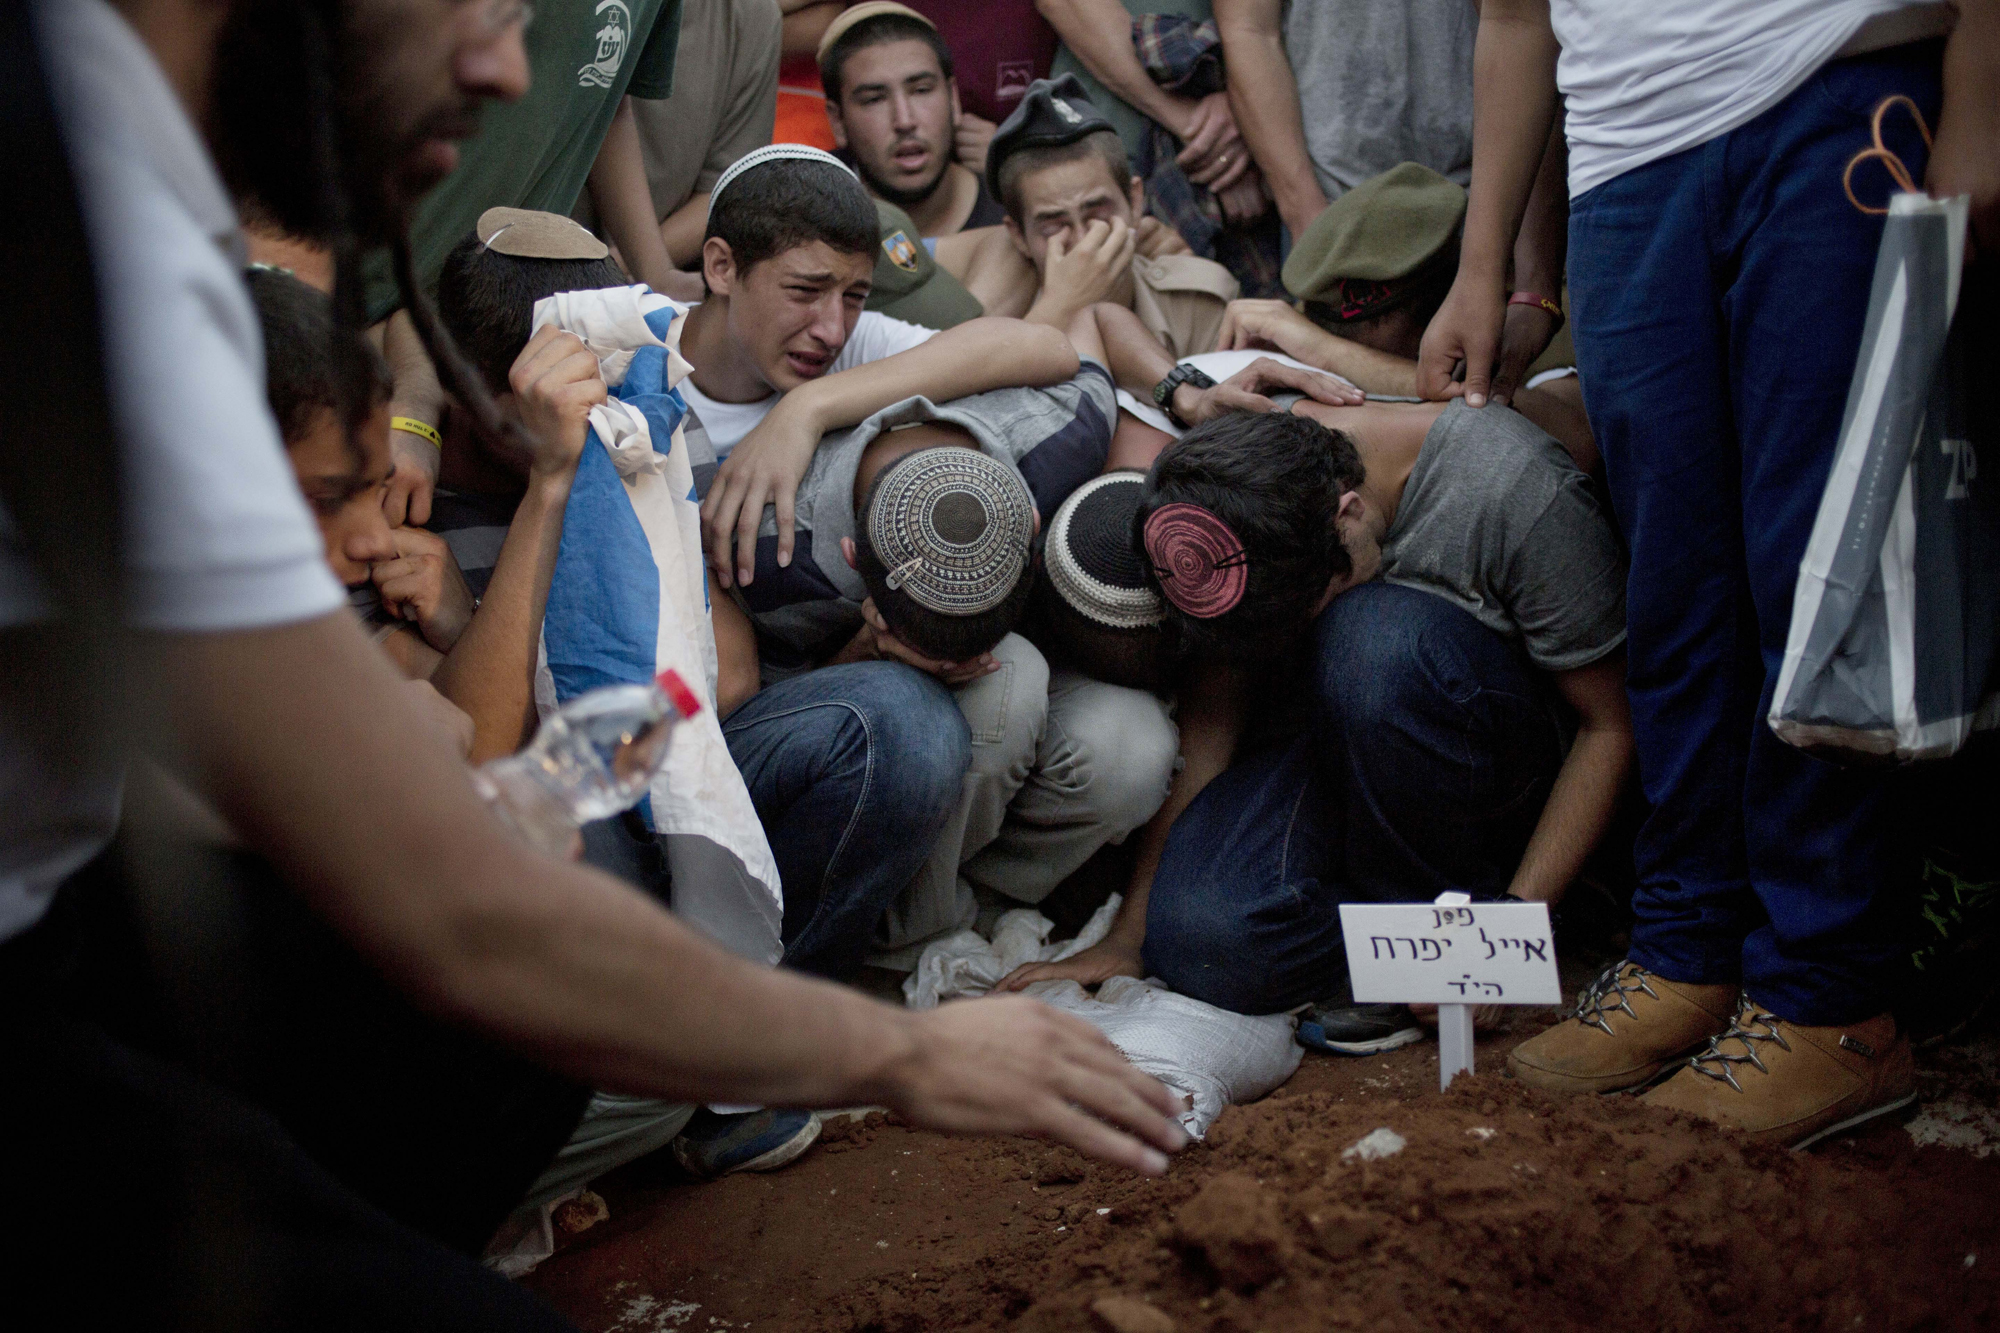 Family and friends of Eyal Yifrah, Gilad Shaar, and Naftali Fraenkel , three Israeli teenagers who were abducted over two weeks ago mourn over the grave of  Eyal Yifrah during their funeral in Modi'in, Israel, July 1.